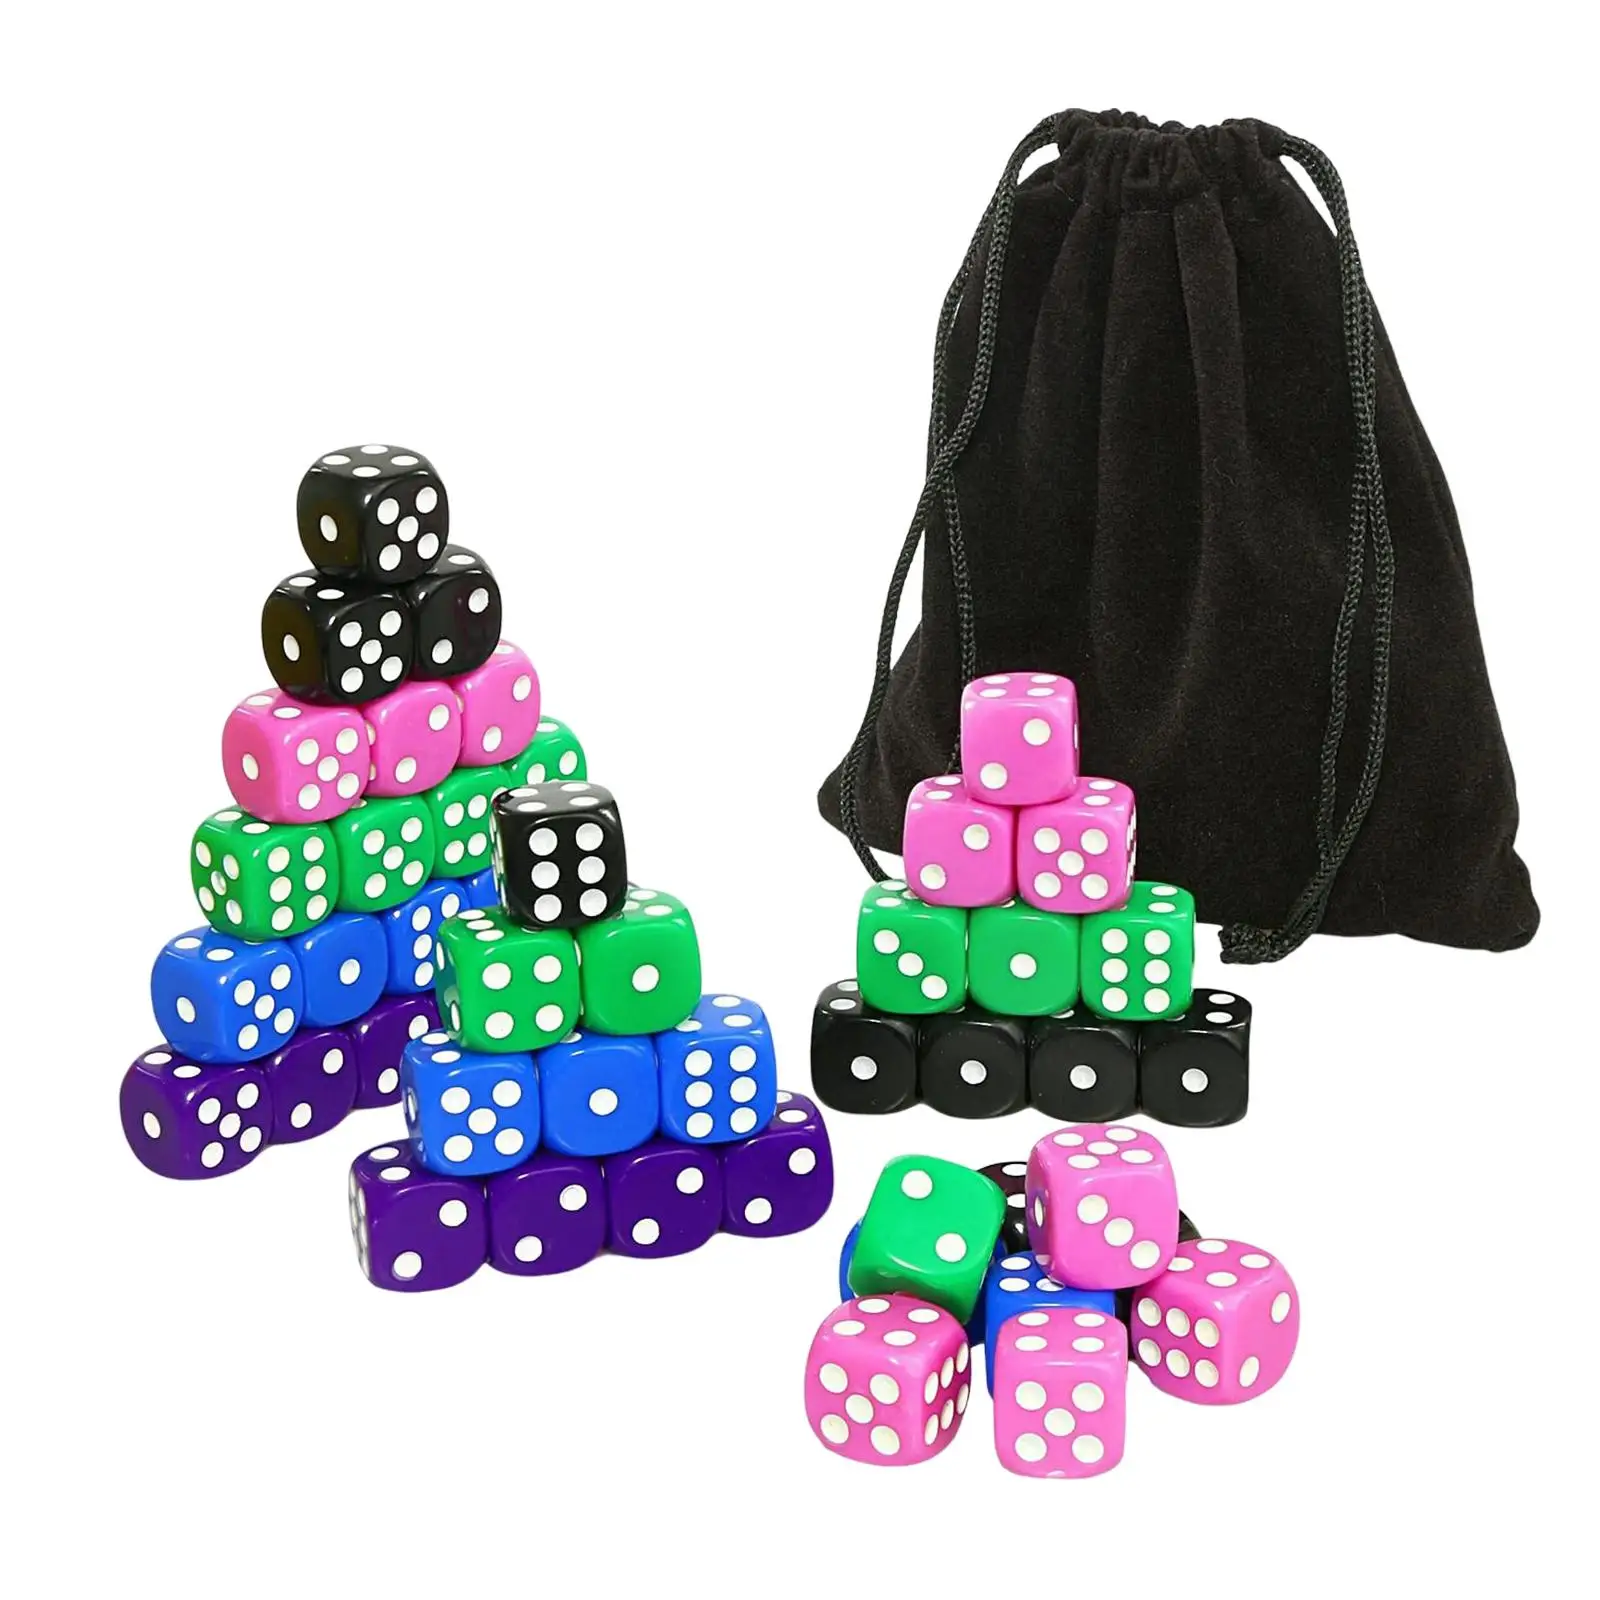 50x D6 6 Sided Dice Set with Velvet Pouch Bar Toys for MTG 16mm Acrylic Dice Table Games Role Playing Games Math Teaching